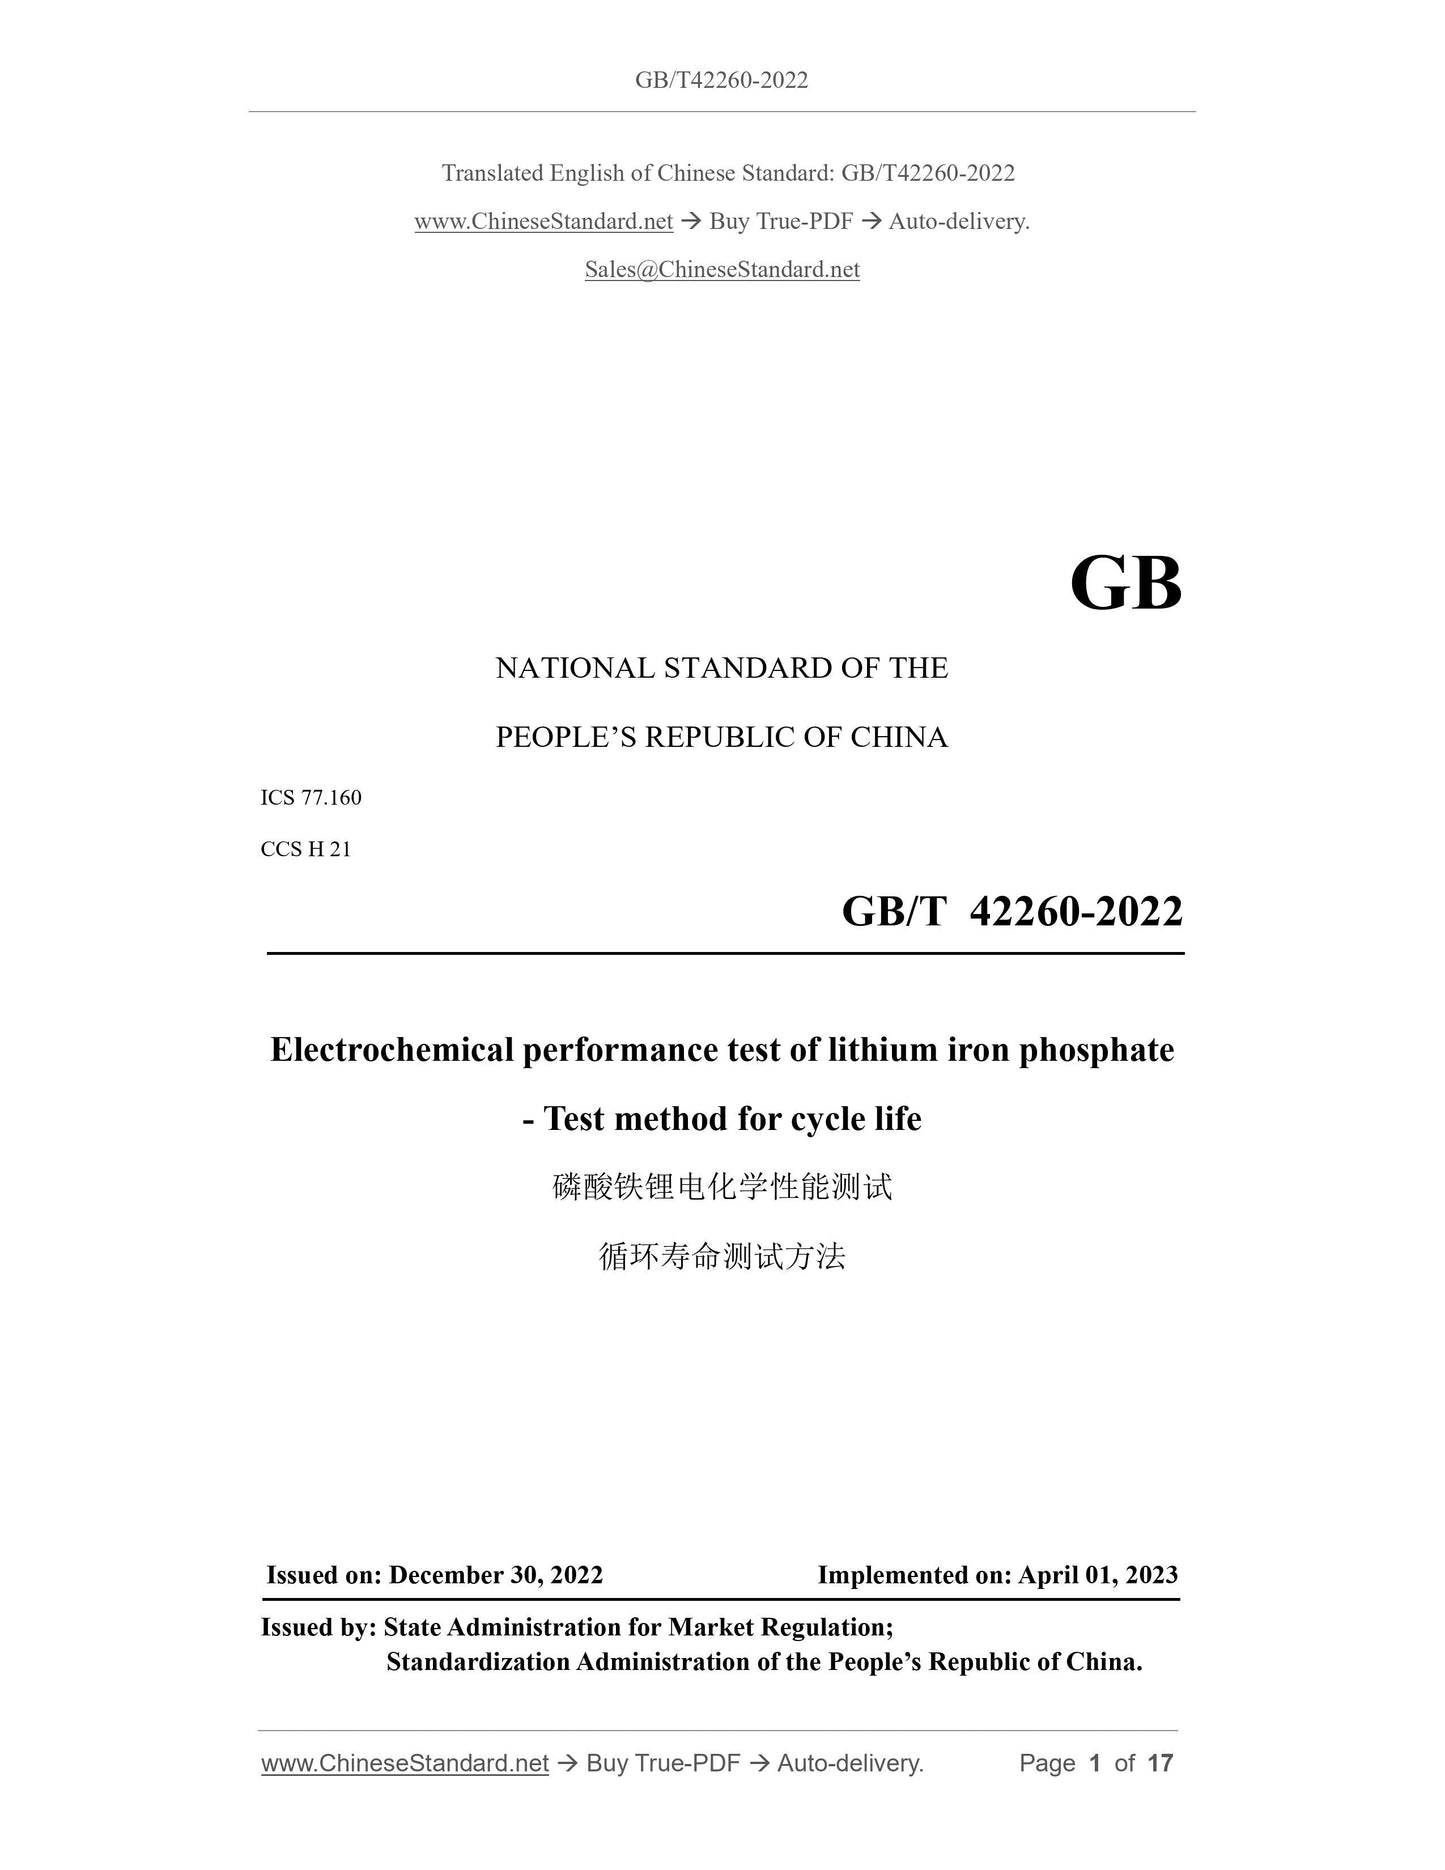 GB/T 42260-2022 Page 1